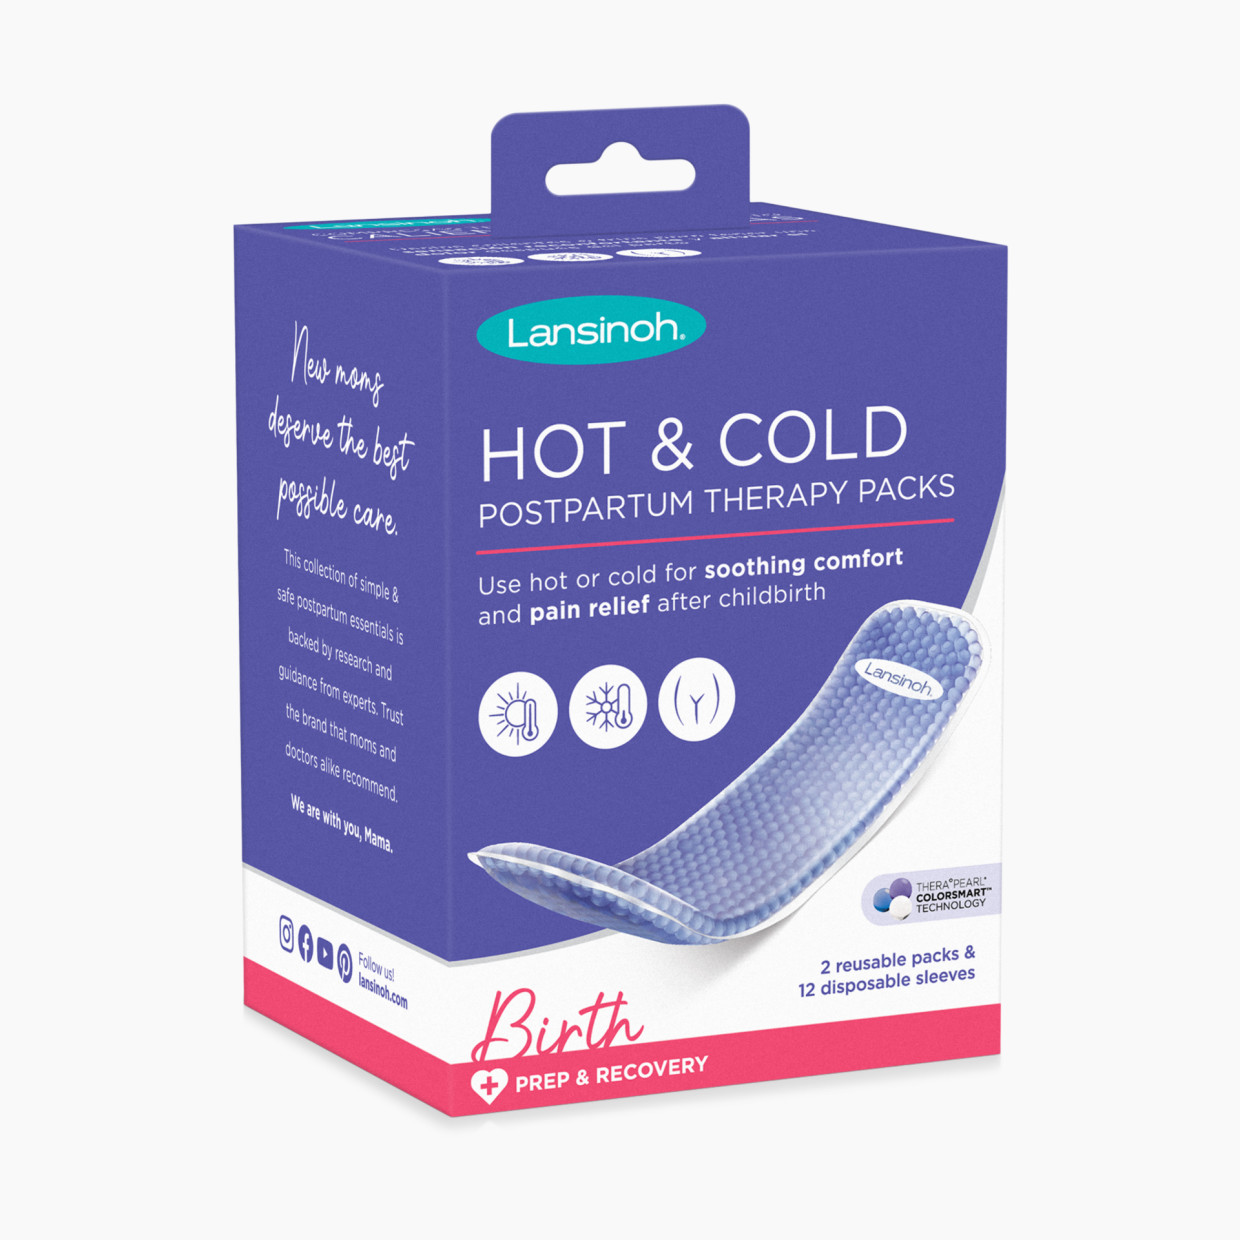 Lansinoh Hot & Cold Postpartum Therapy Packs (2 Pack).